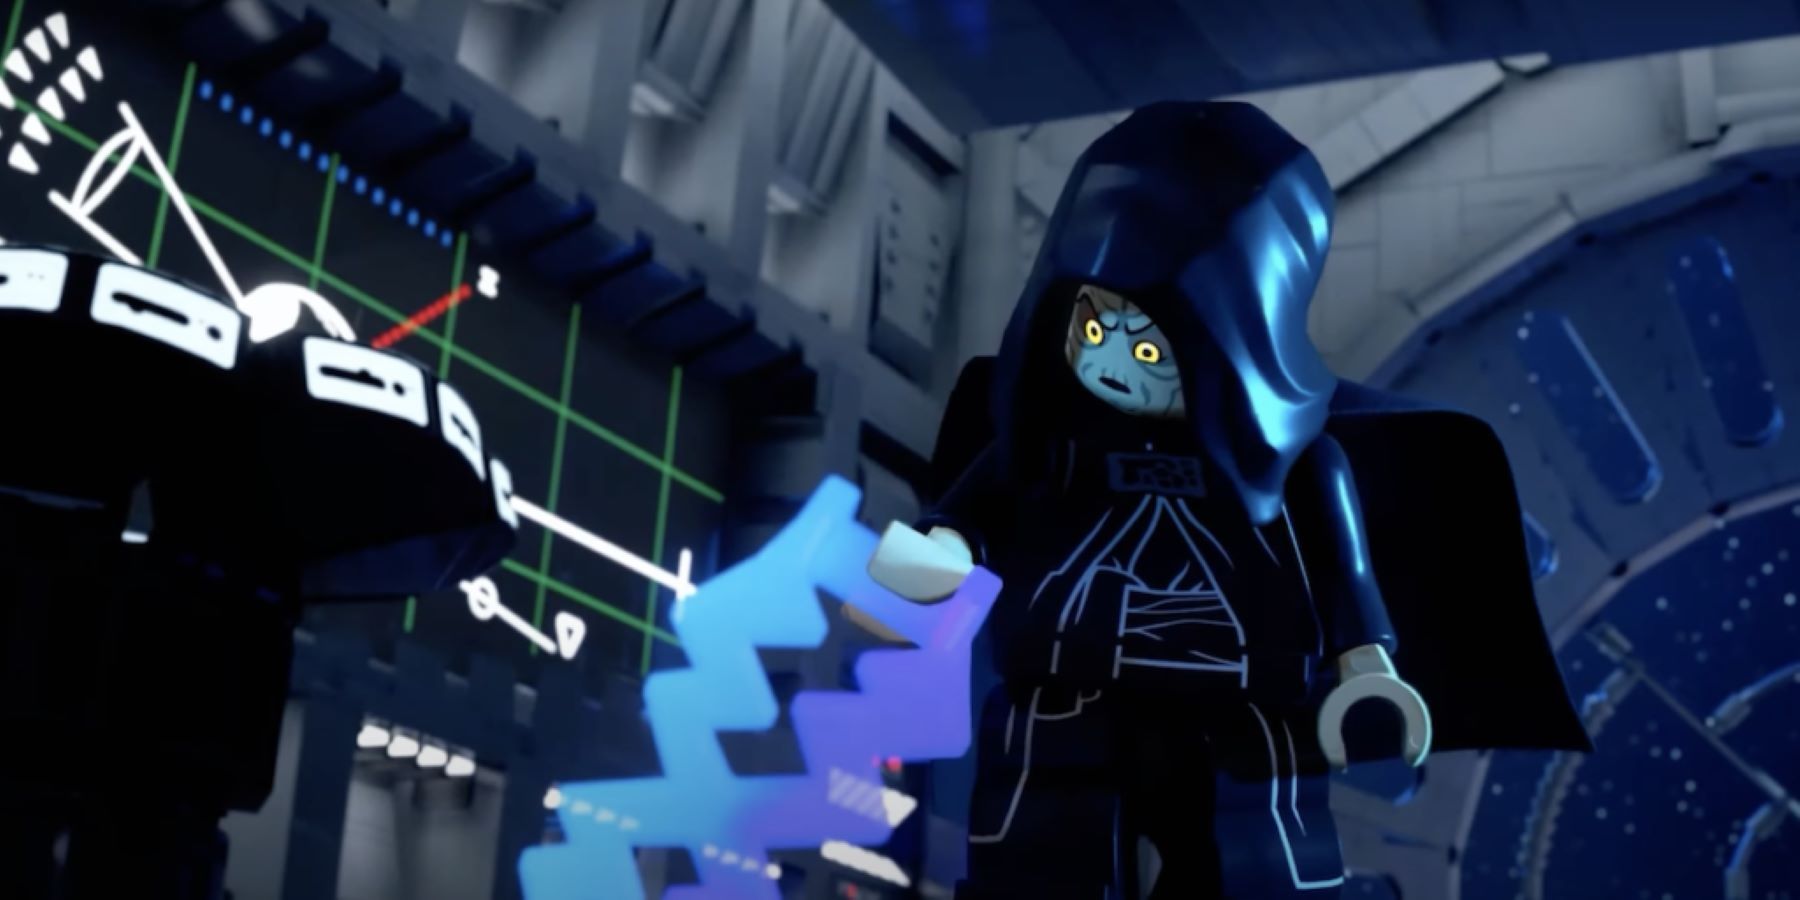 LEGO Star Wars The Skywalker Saga Has Problems Including Bad Platforming Messy Boss Battles A Lack Of Variety With Character Classes And A Crowded HUD